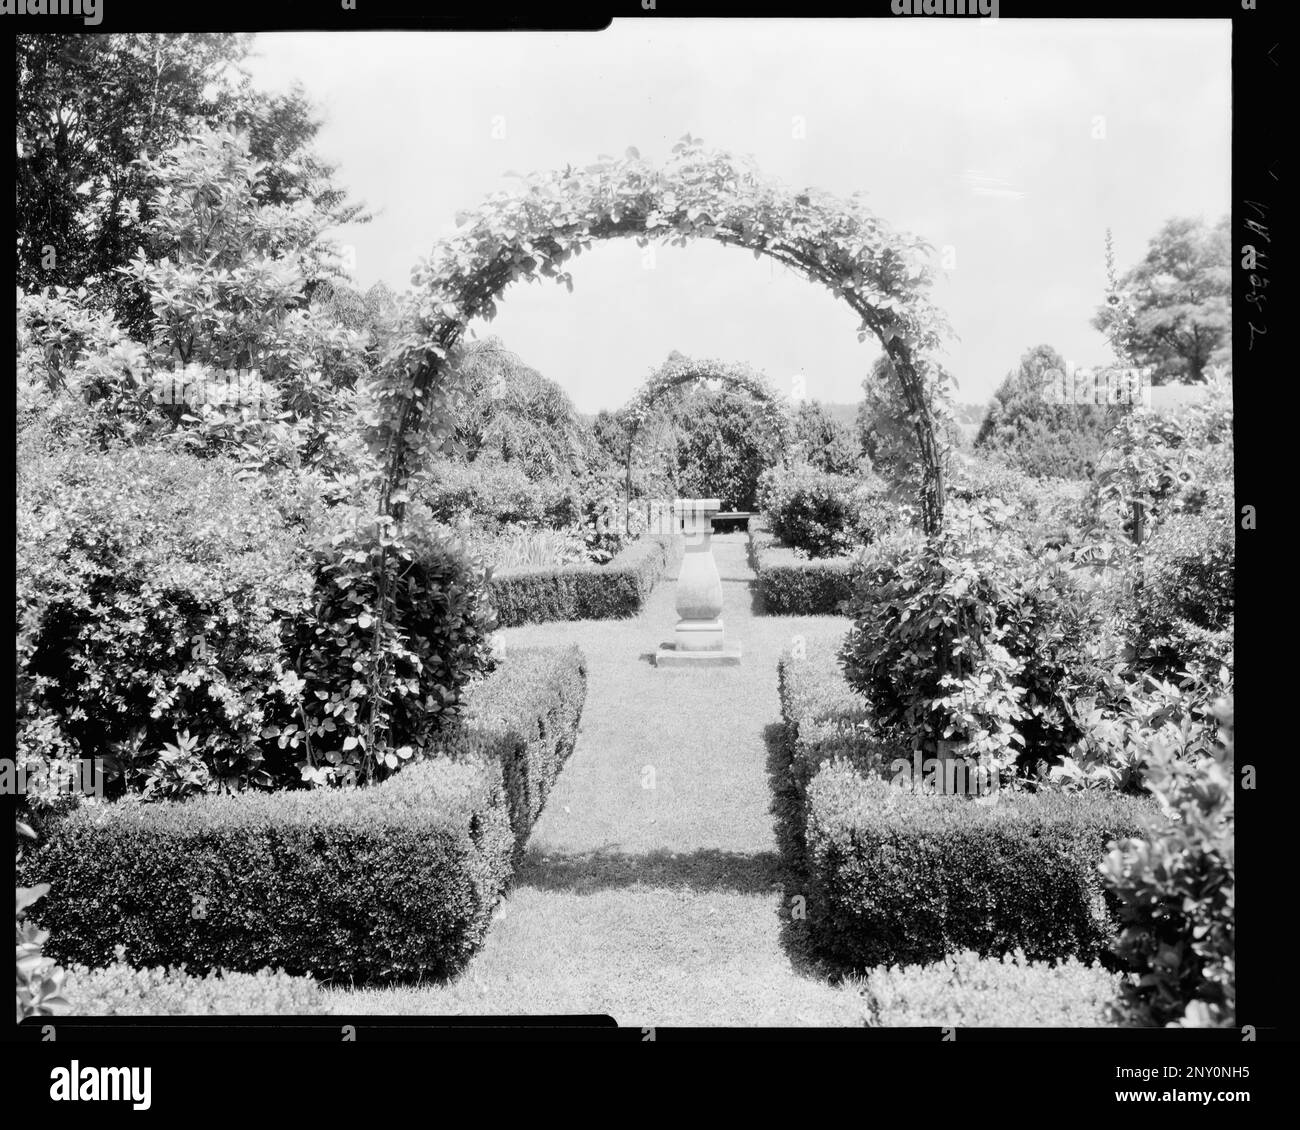 Oatlands, Leesburg vic., Loudoun County, Virginia. Carnegie Survey of the Architecture of the South. United States  Virginia  Loudoun County  Leesburg vic, Arbors , Bowers, Gardens, Estates. Stock Photo